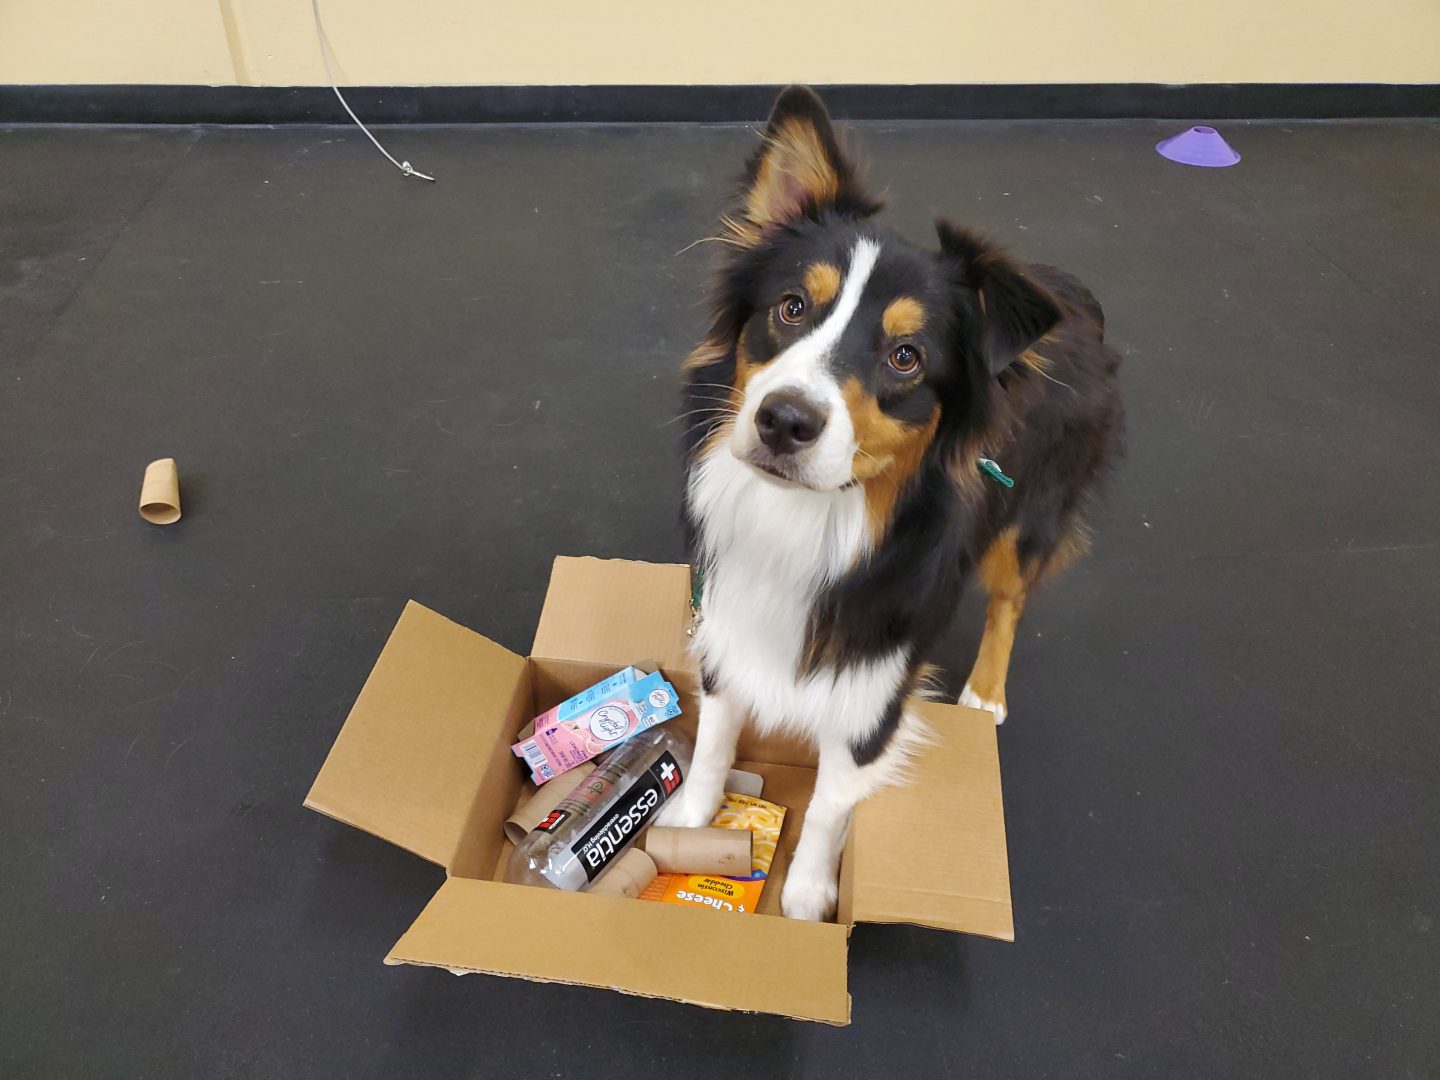 DIY Busy Box: An Easy-To-Make Enrichment Dog Toy - Proud Dog Mom